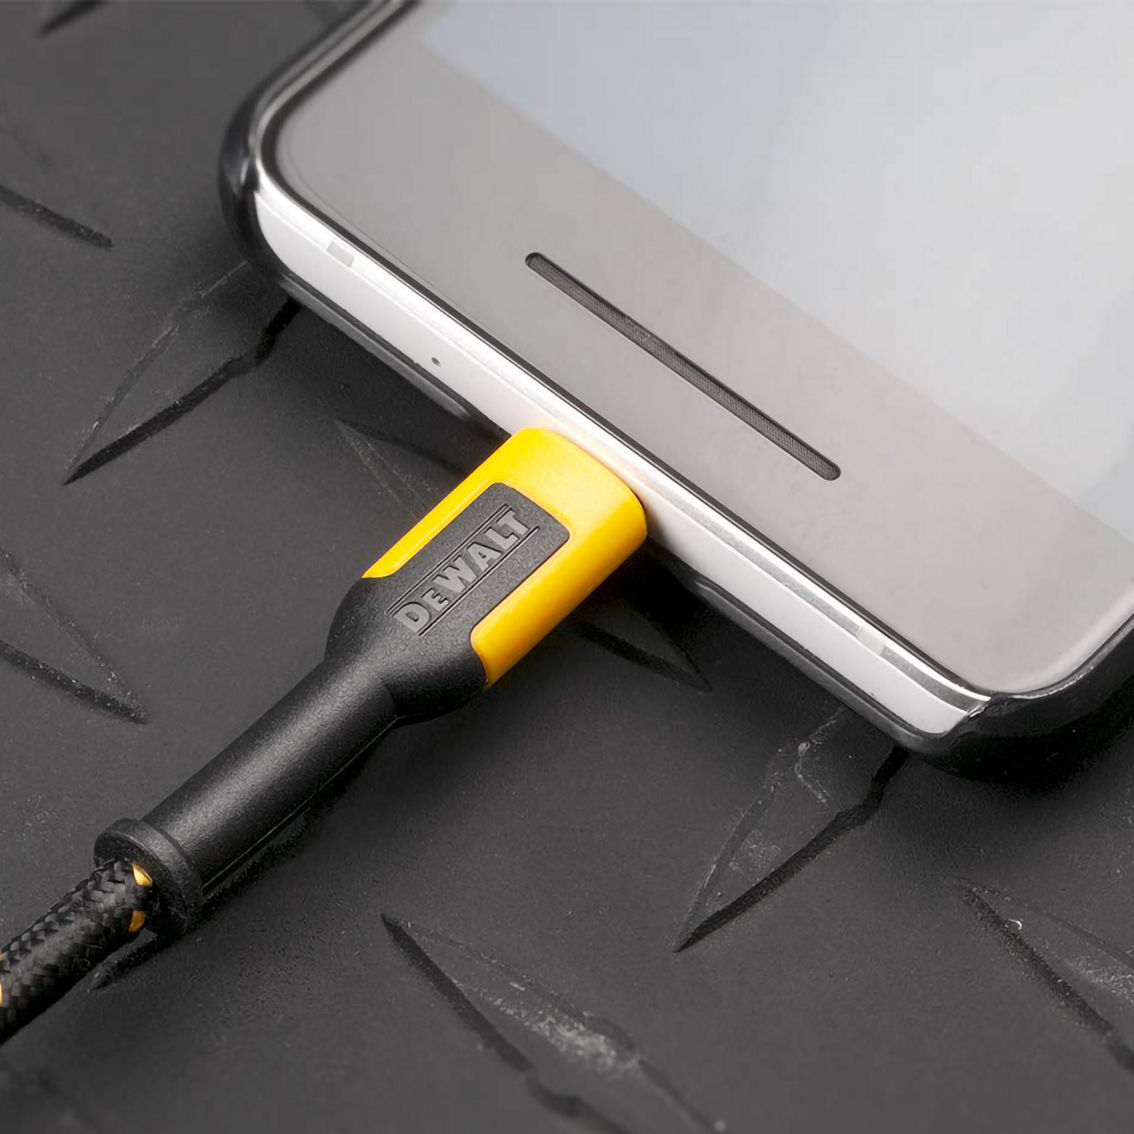 DeWalt 6 ft. Reinforced Braided Charging Cable for Micro-USB - Image 3 of 4